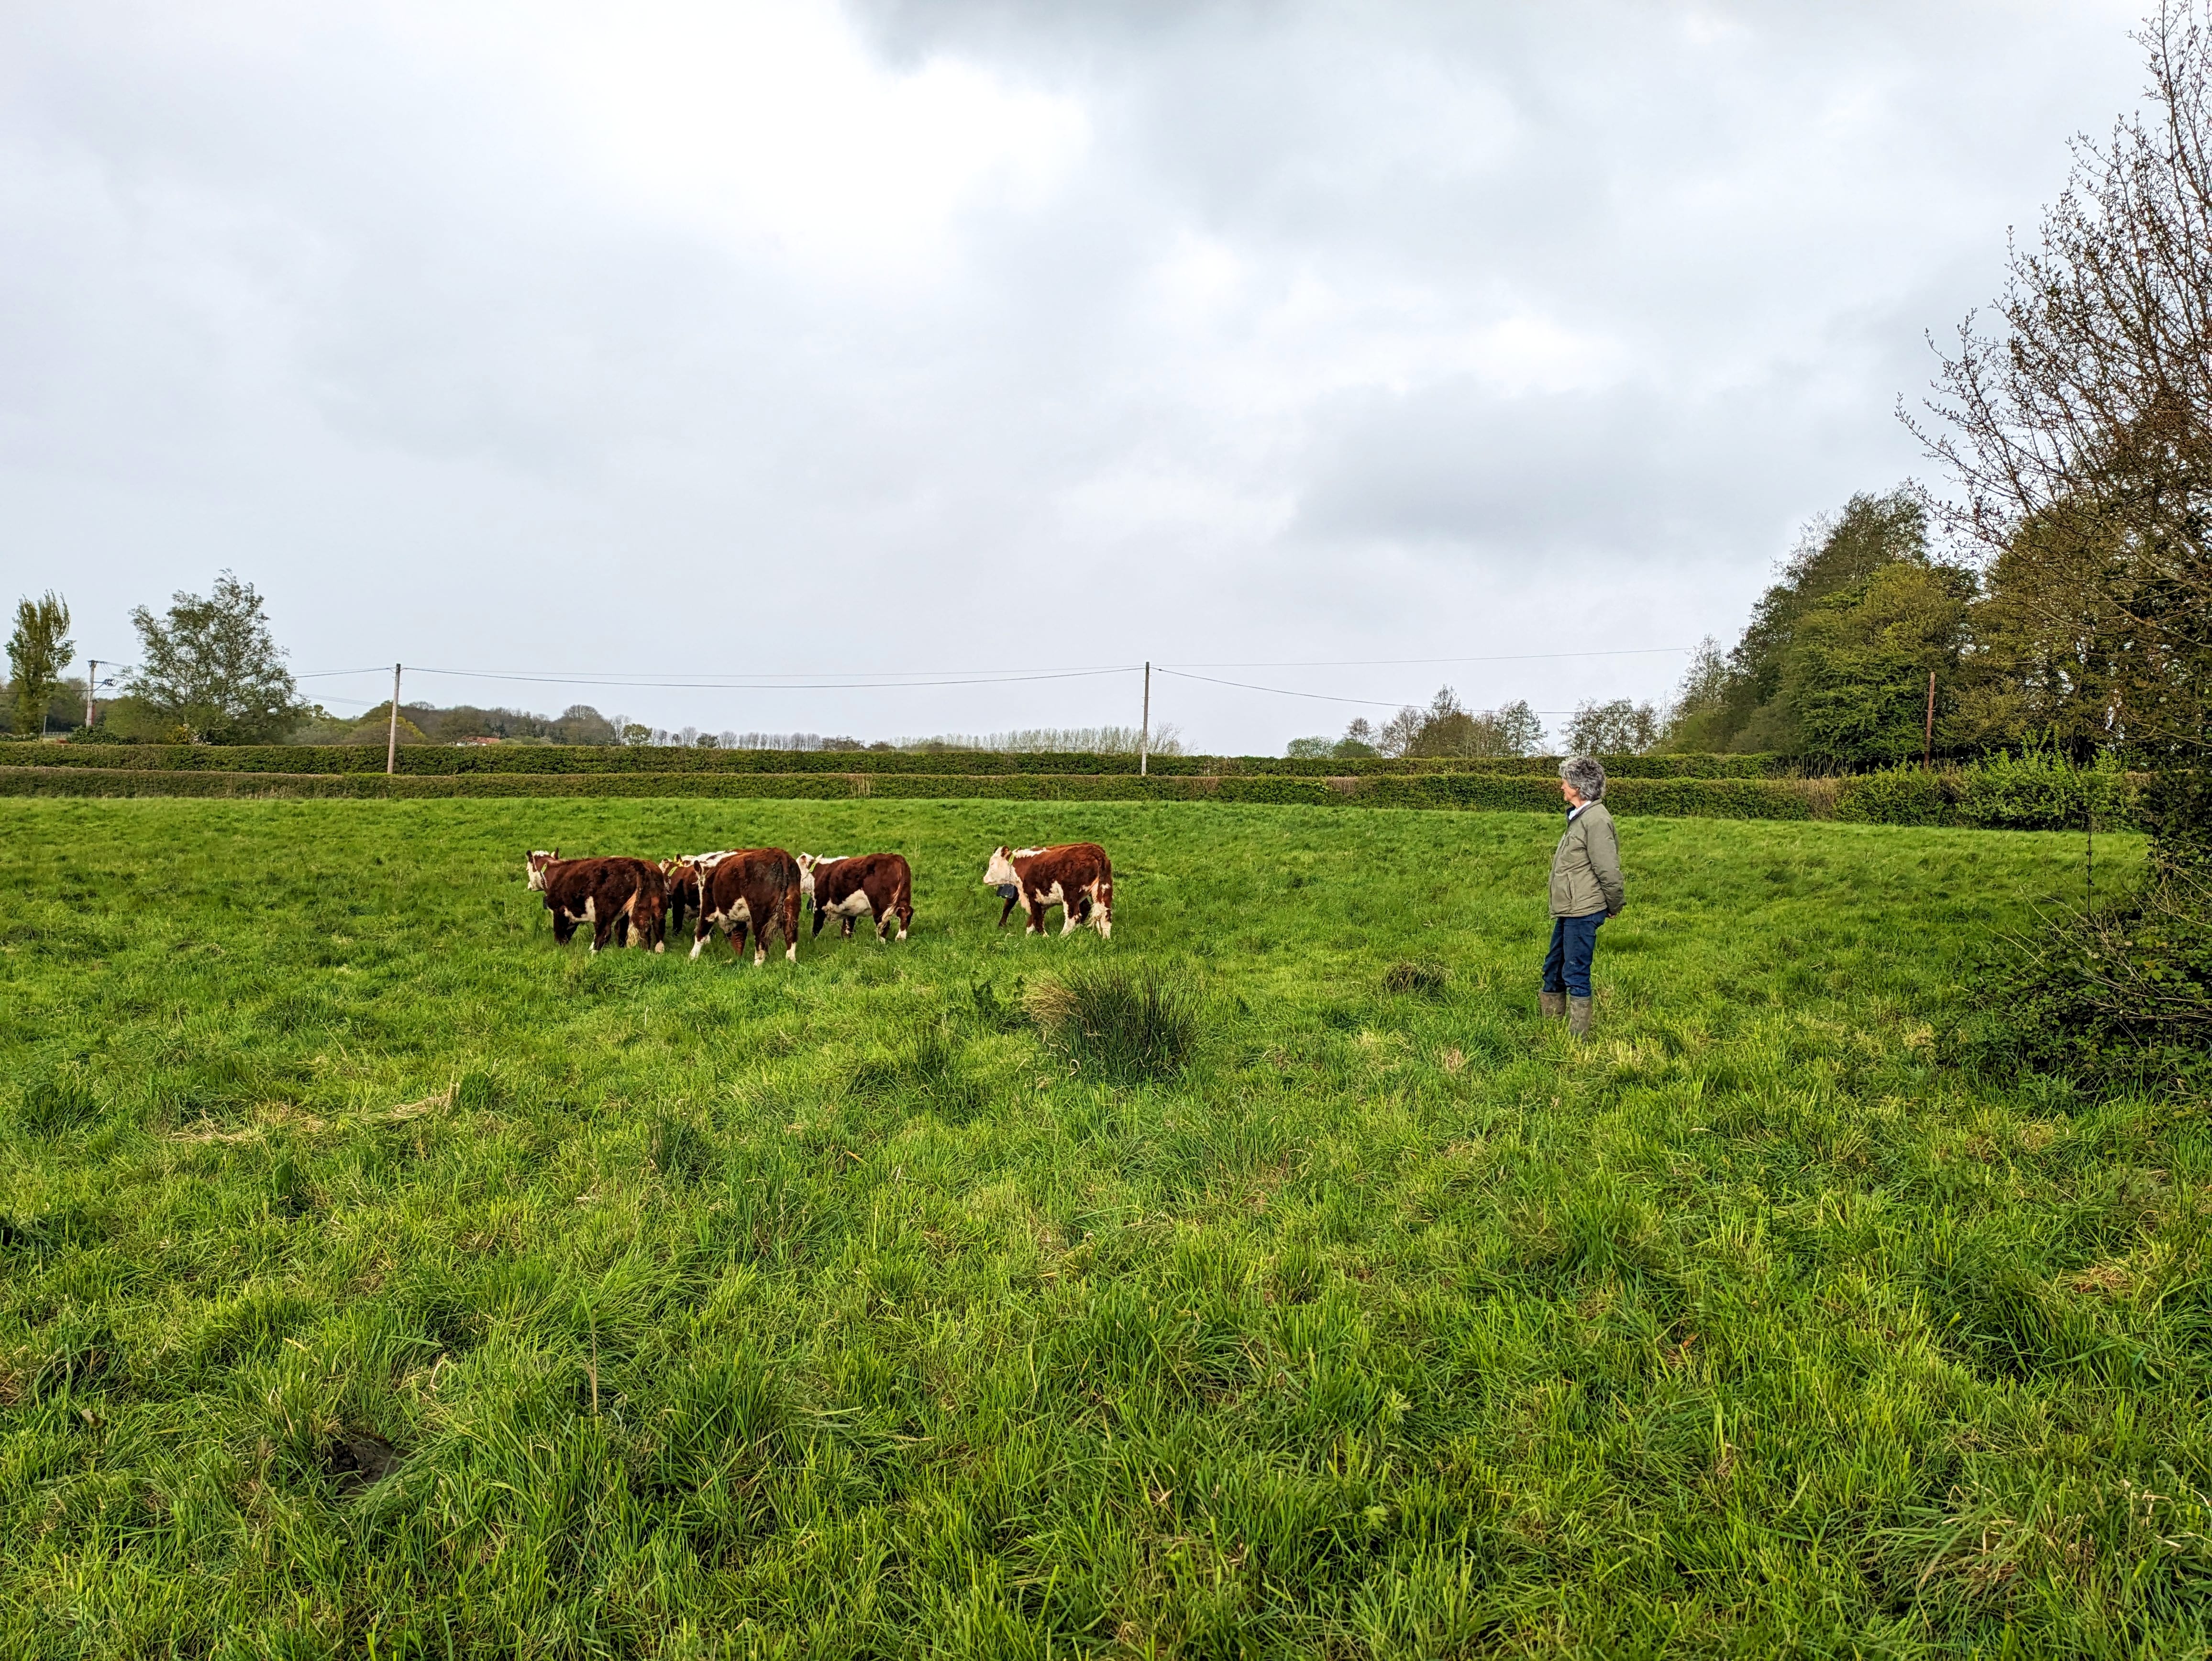 Farmer in standing in a field with a herd of cows